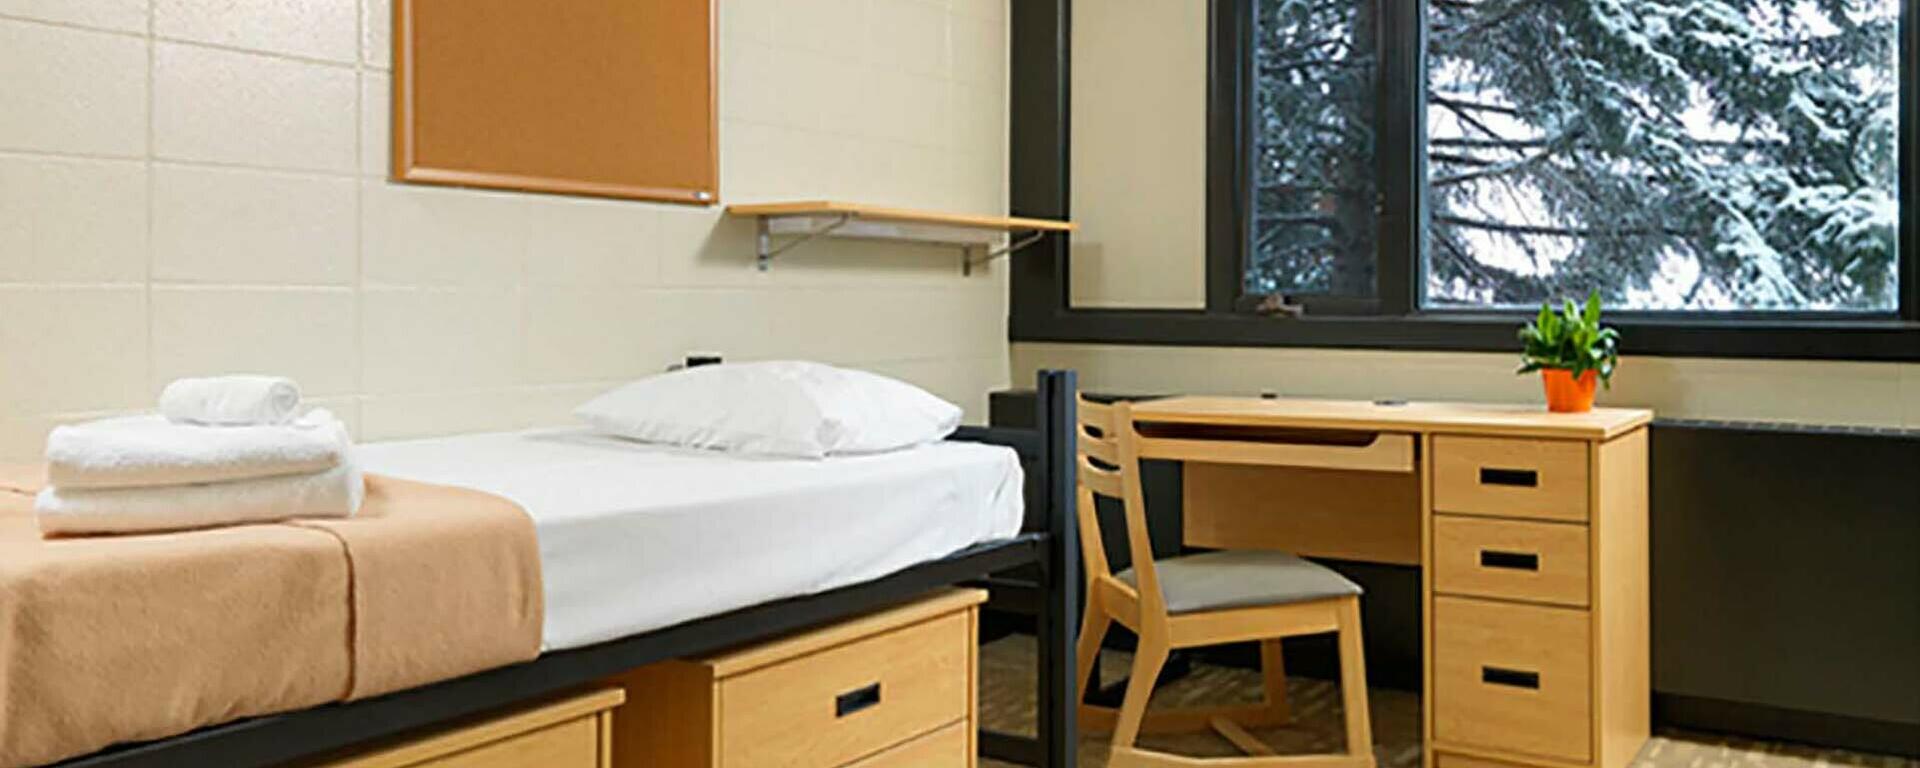 MUNI dormitories  Accommodation and Catering Services